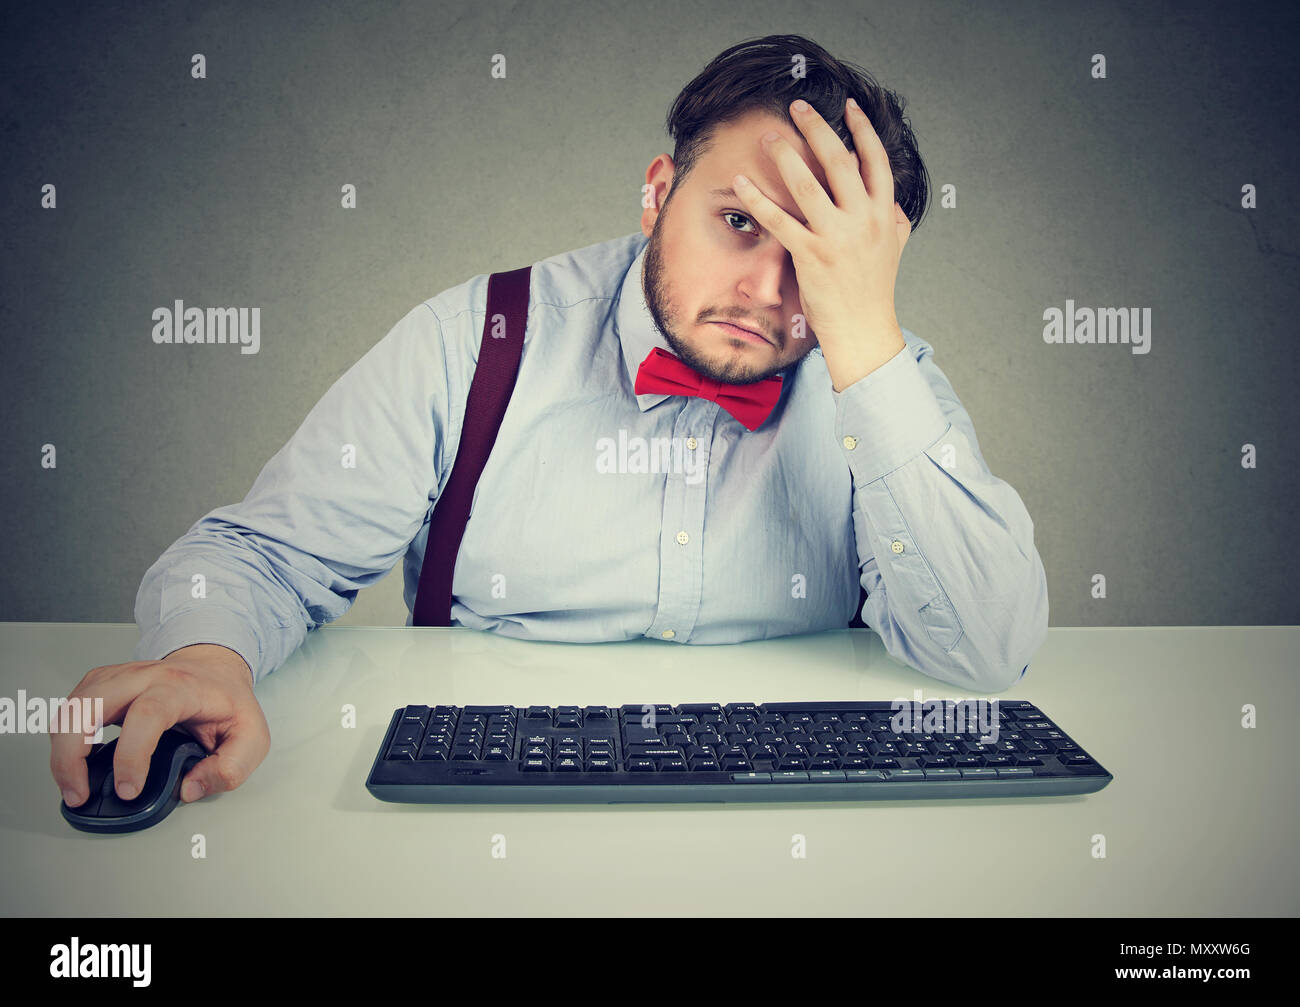 Chunky man at working table leaning on hand in tiredness and looking at camera in stress and fatigue Stock Photo